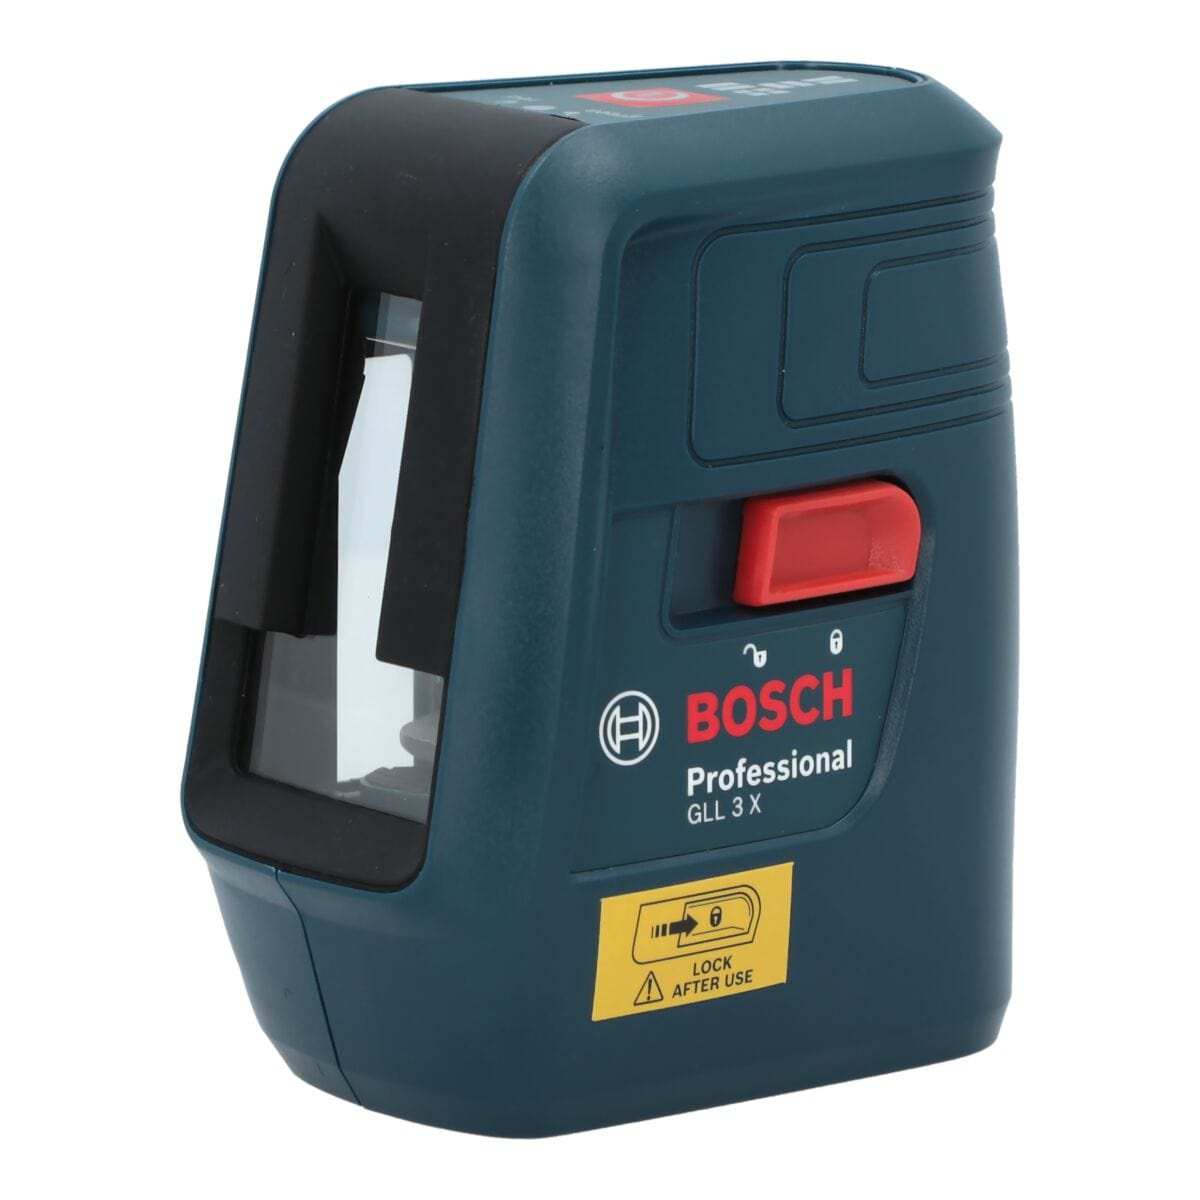 Enhance your leveling precision with the Bosch Professional 15m Line Laser Level (GLL 3 X) at SupplyMaster.store in Ghana. Digital Meter Buy Tools hardware Building materials